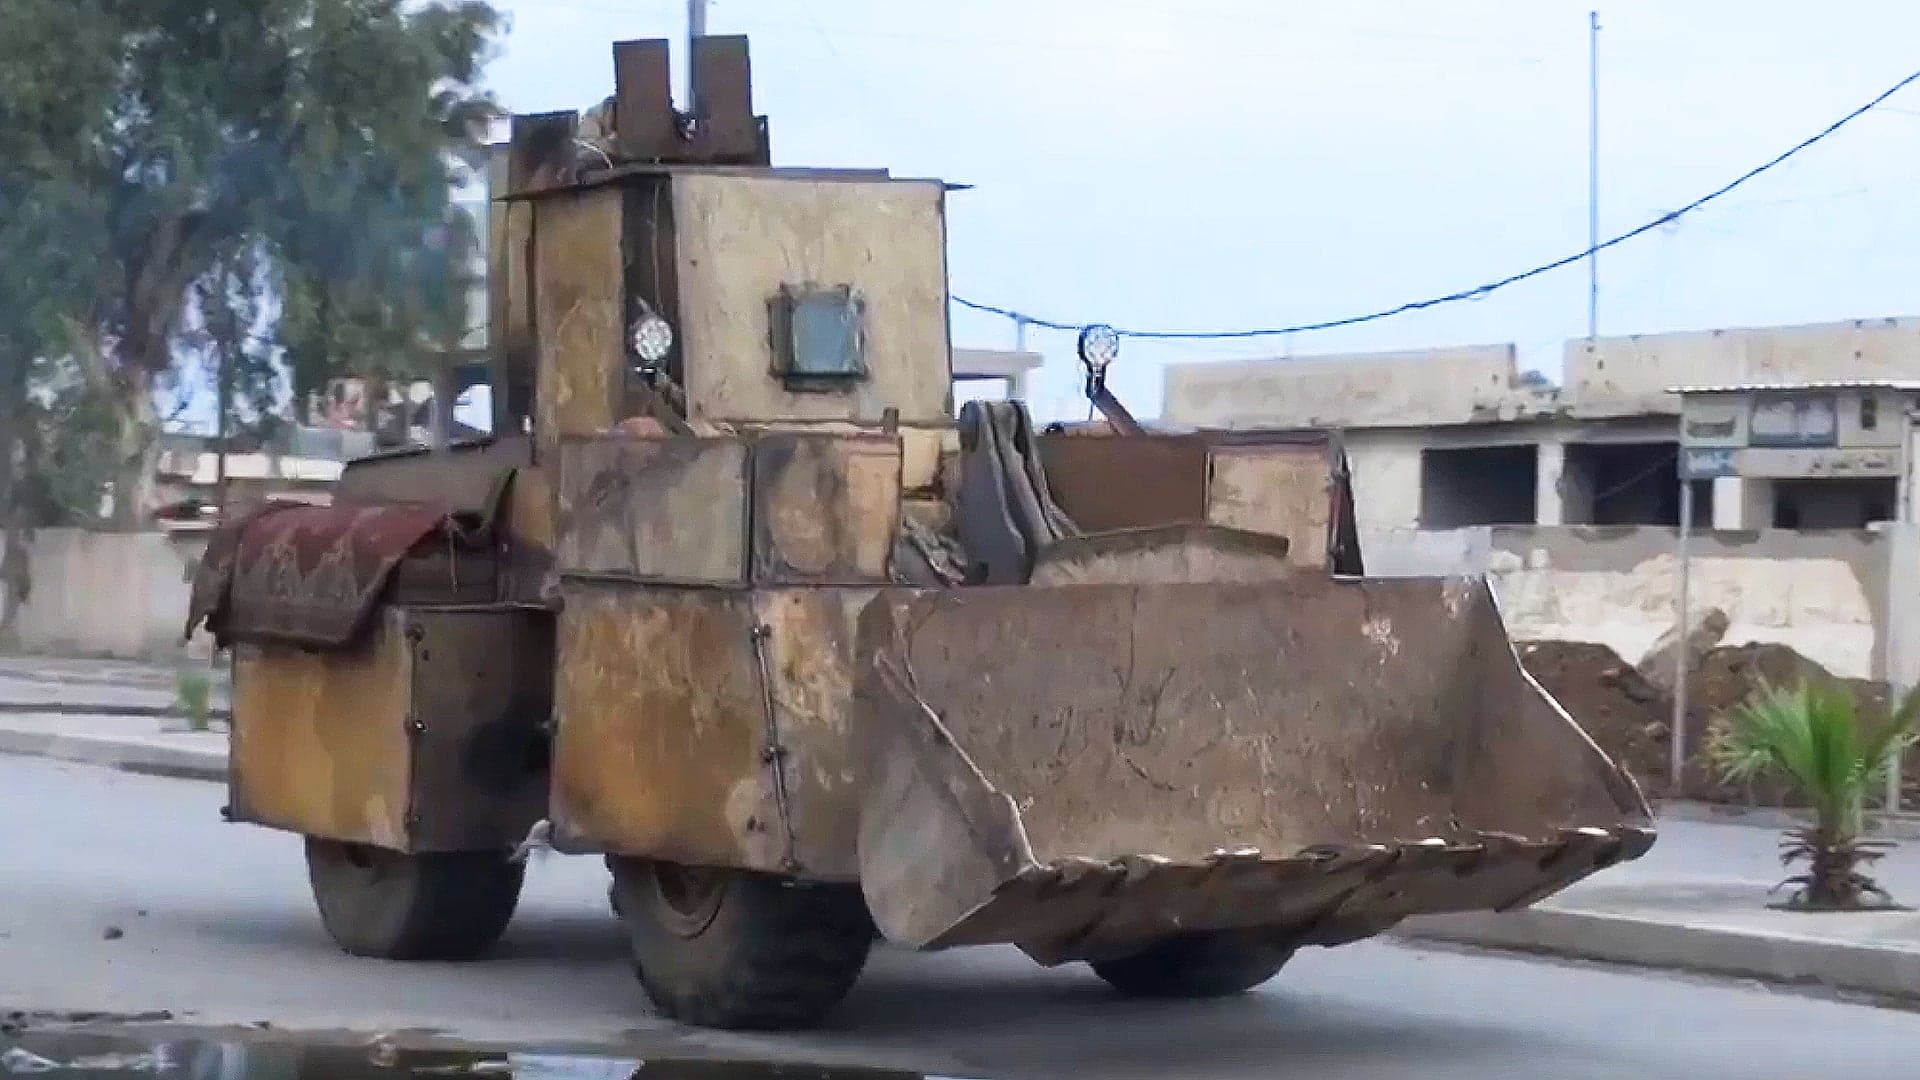 This ISIS Armored Loader Just Broke Through Iraqi Army Lines and Blew Up